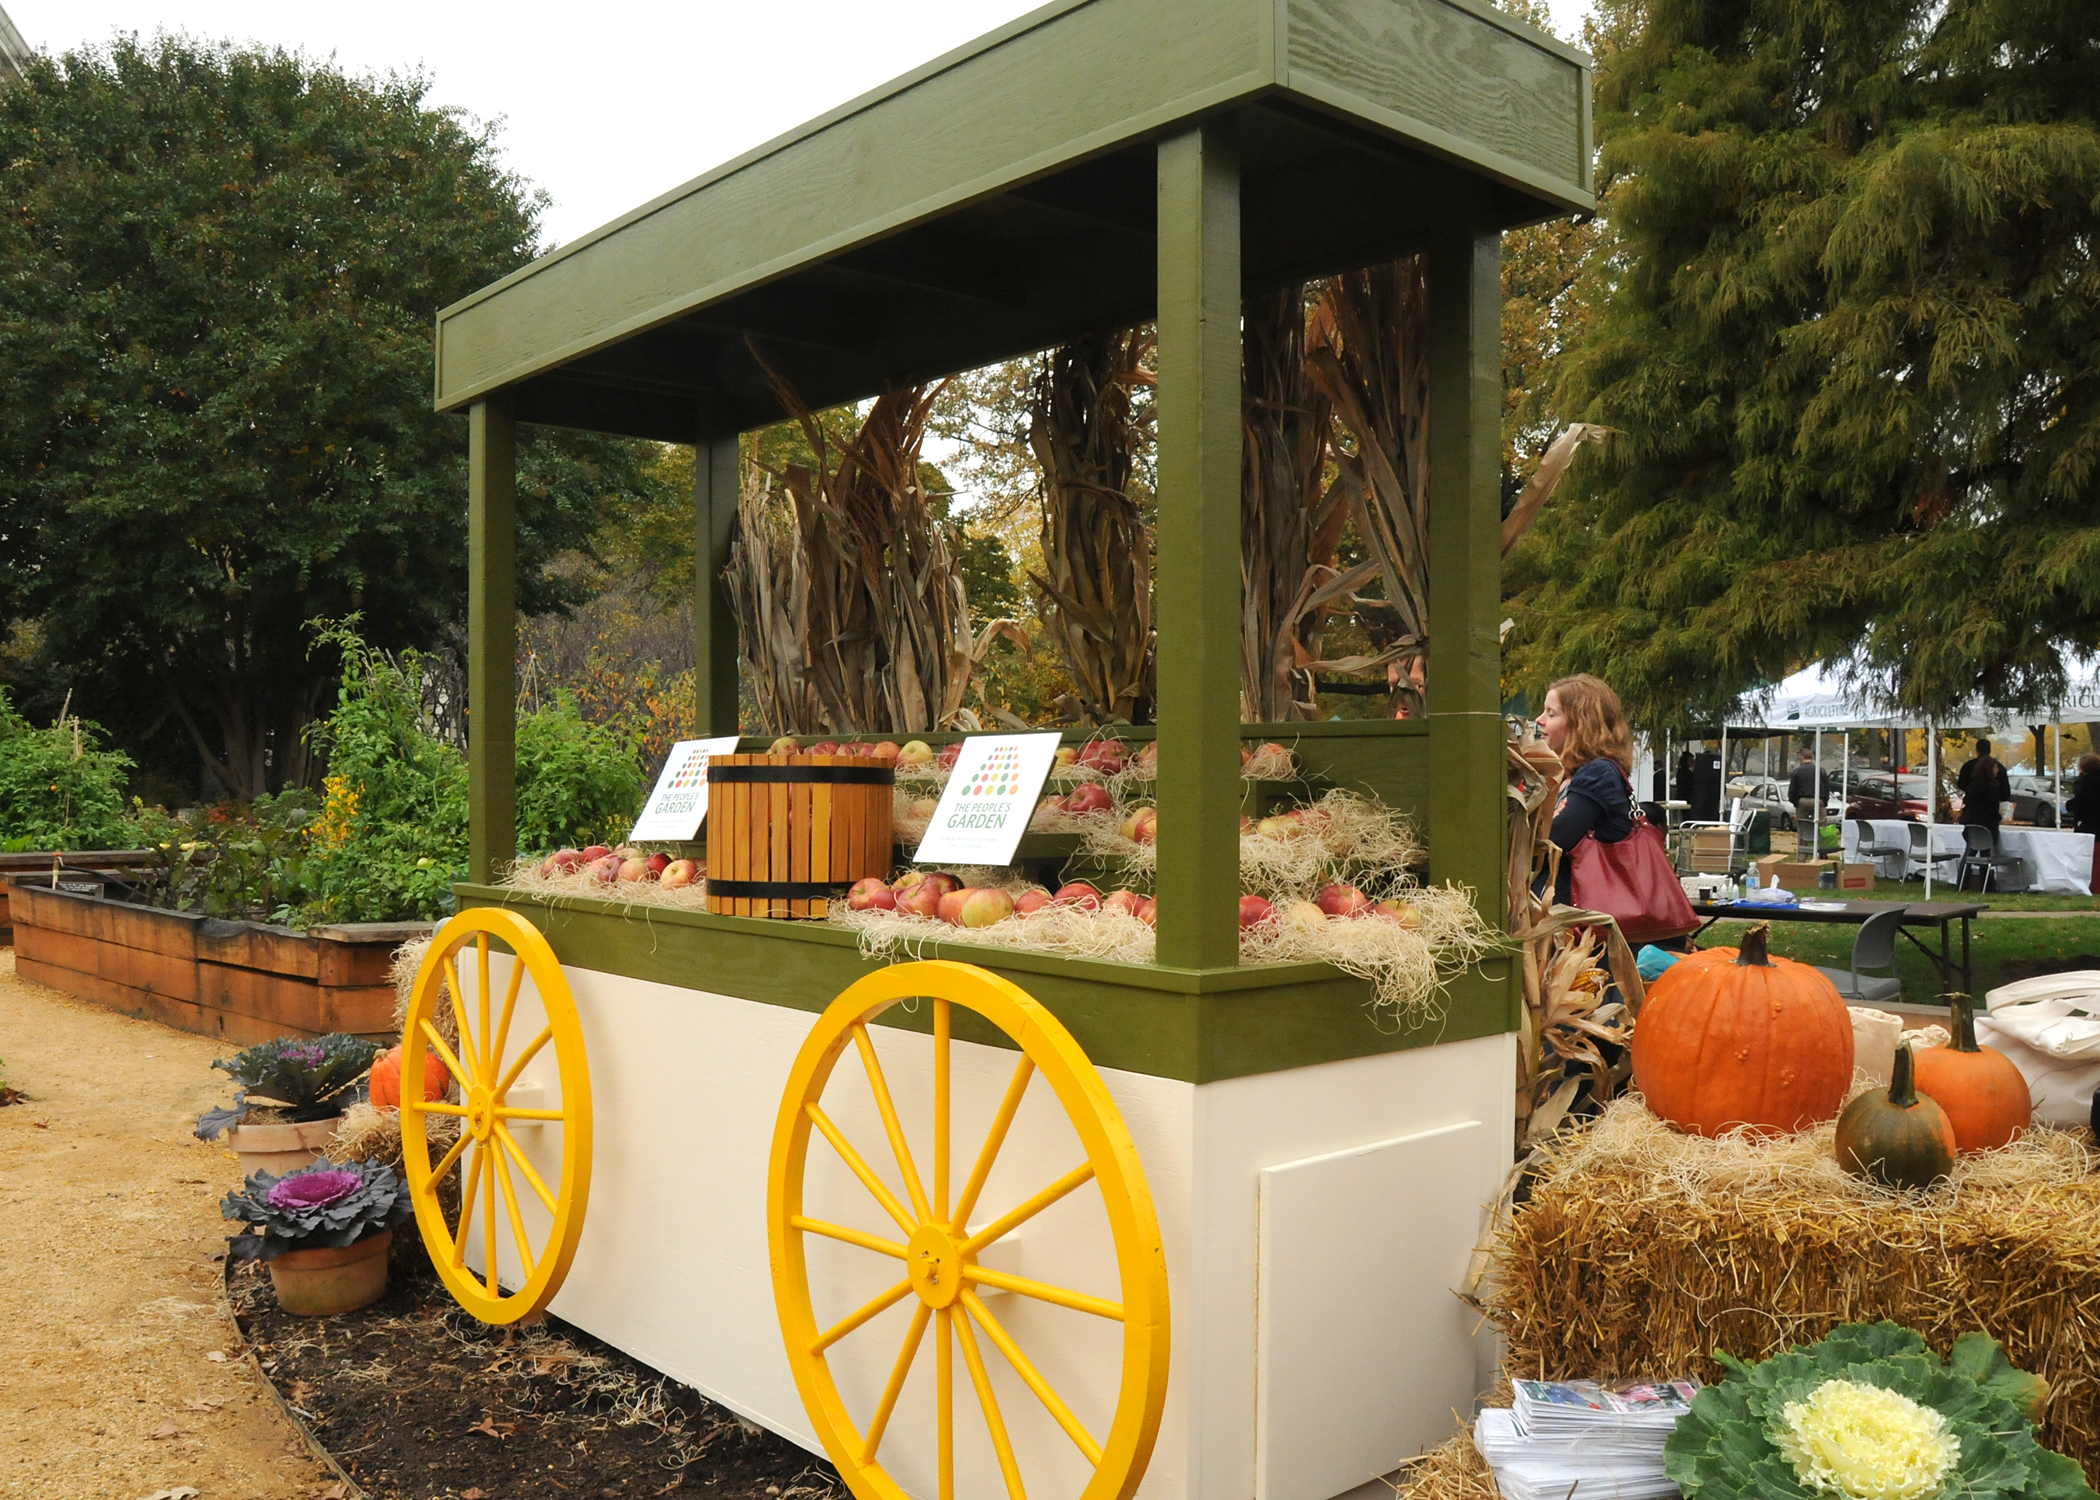 A produce stand with yellow wagon wheels and a green canopy.